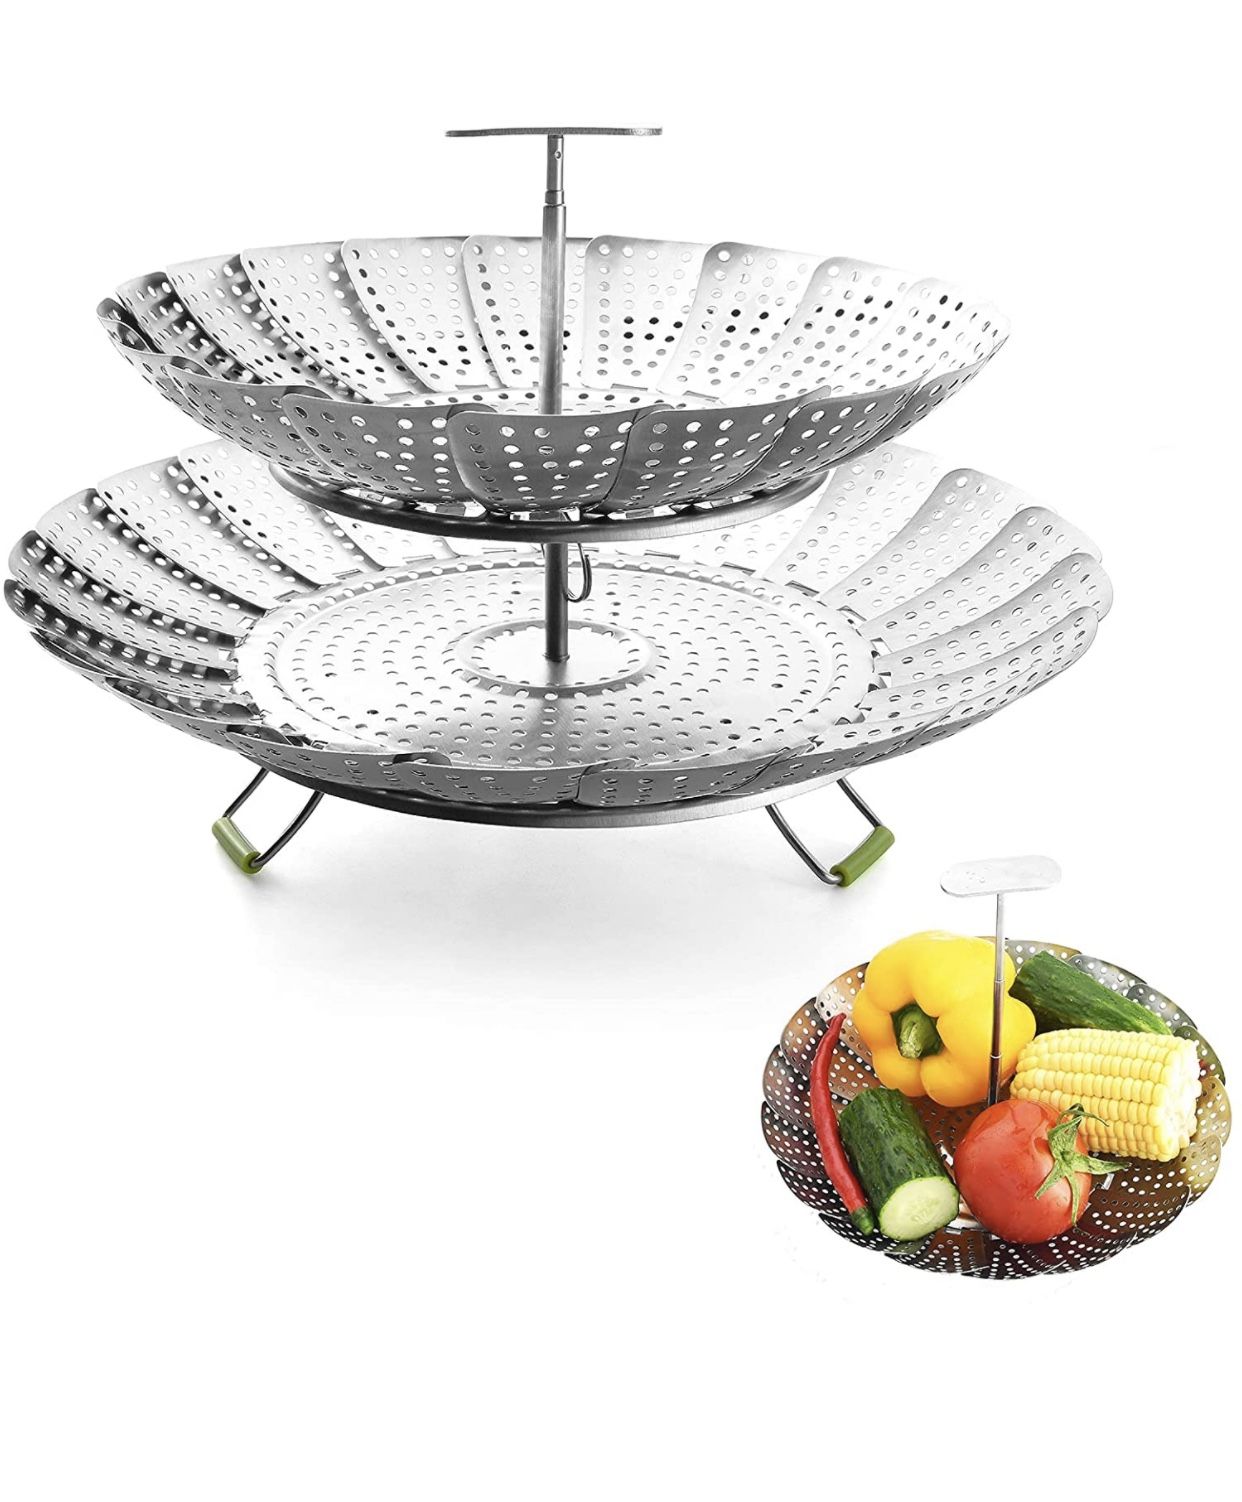 New never used Food Steamer Baskets For Cooking 2 Layers - Expandable & Collapsible Vegetable Steamer Basket Stainless Steel (7" - 10.8") - Easy To Us